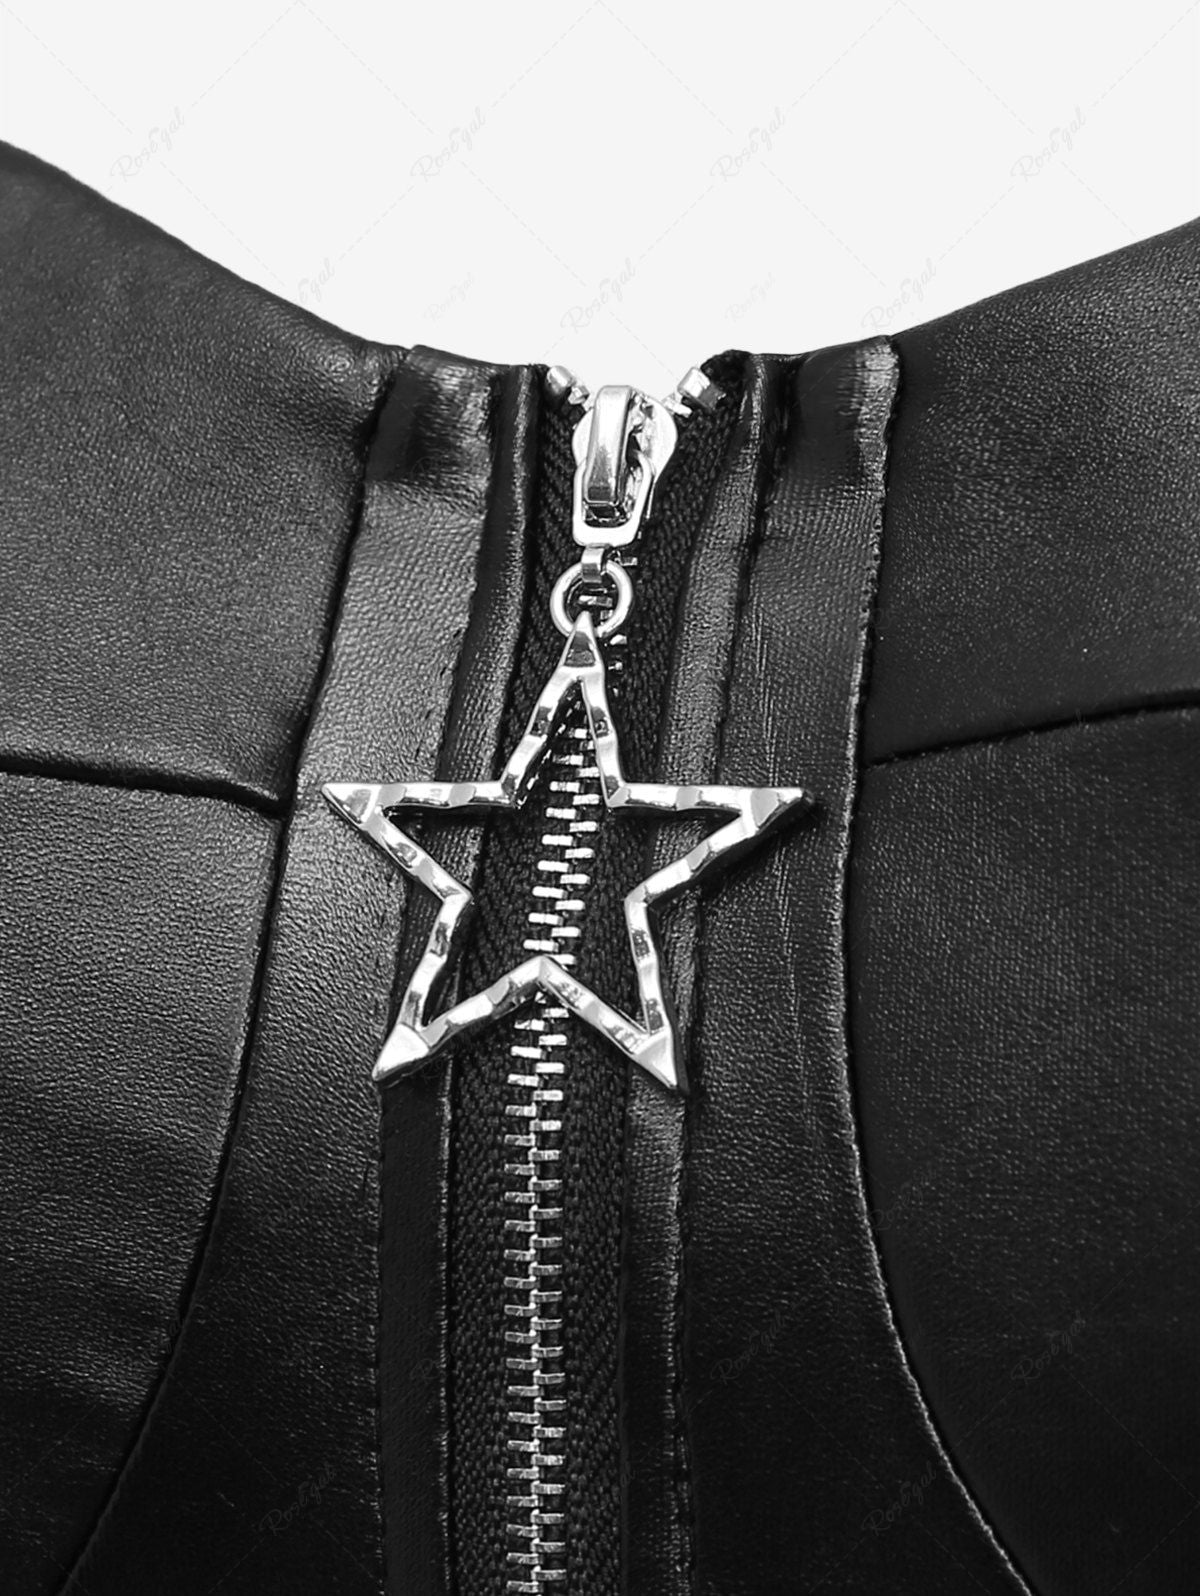 Gothic Pentagram Full Zipper O-Ring PU Panel Hook and Eye Lace Up Corset with Adjustable Shoulder Strap